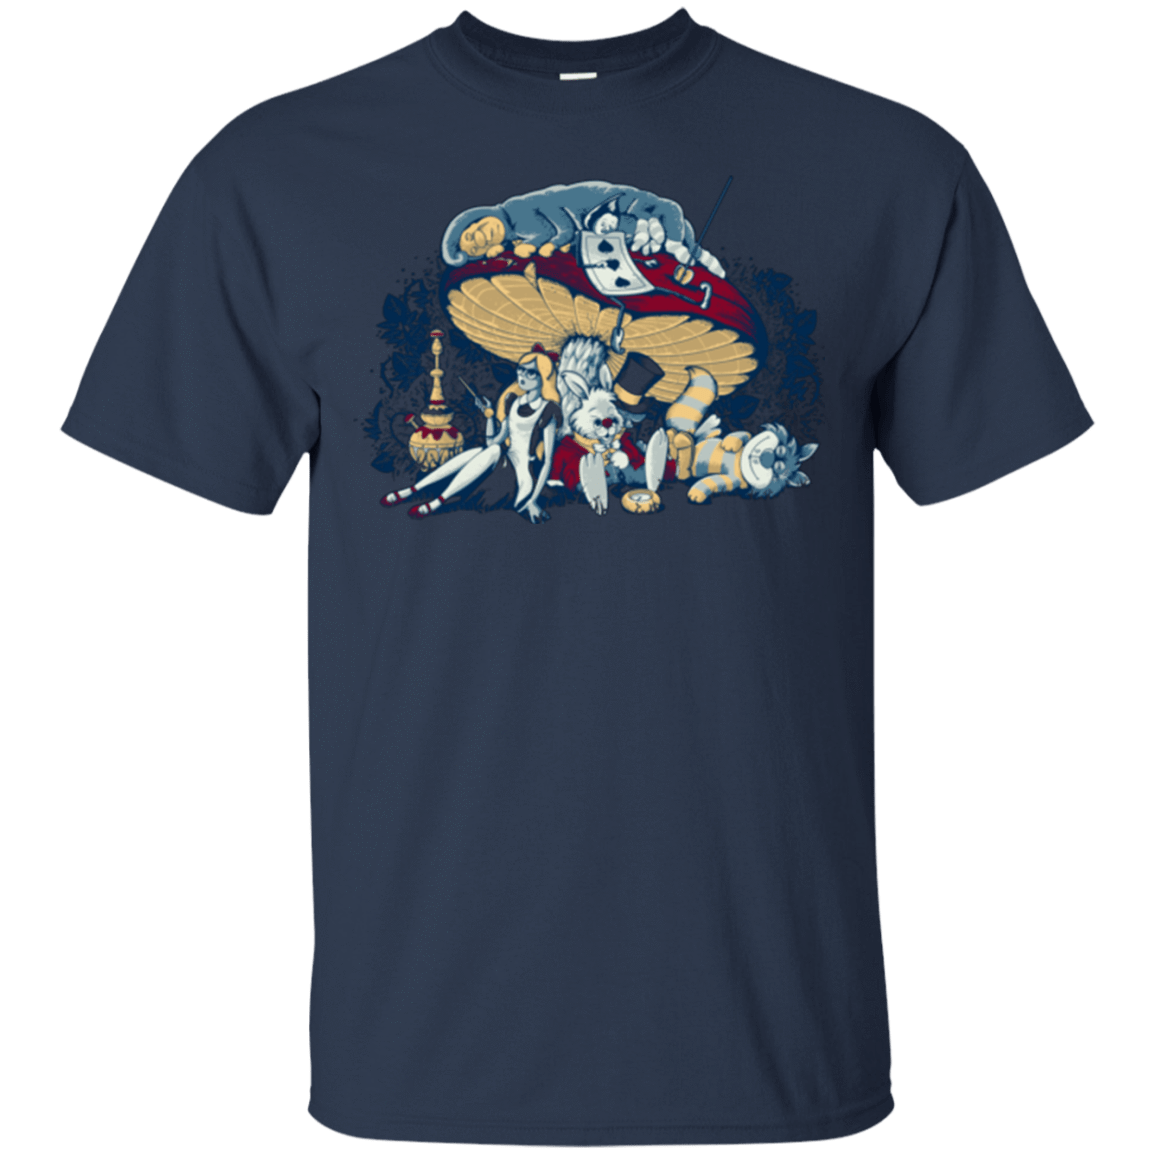 T-Shirts Navy / Small STONED IN WONDERLAND T-Shirt